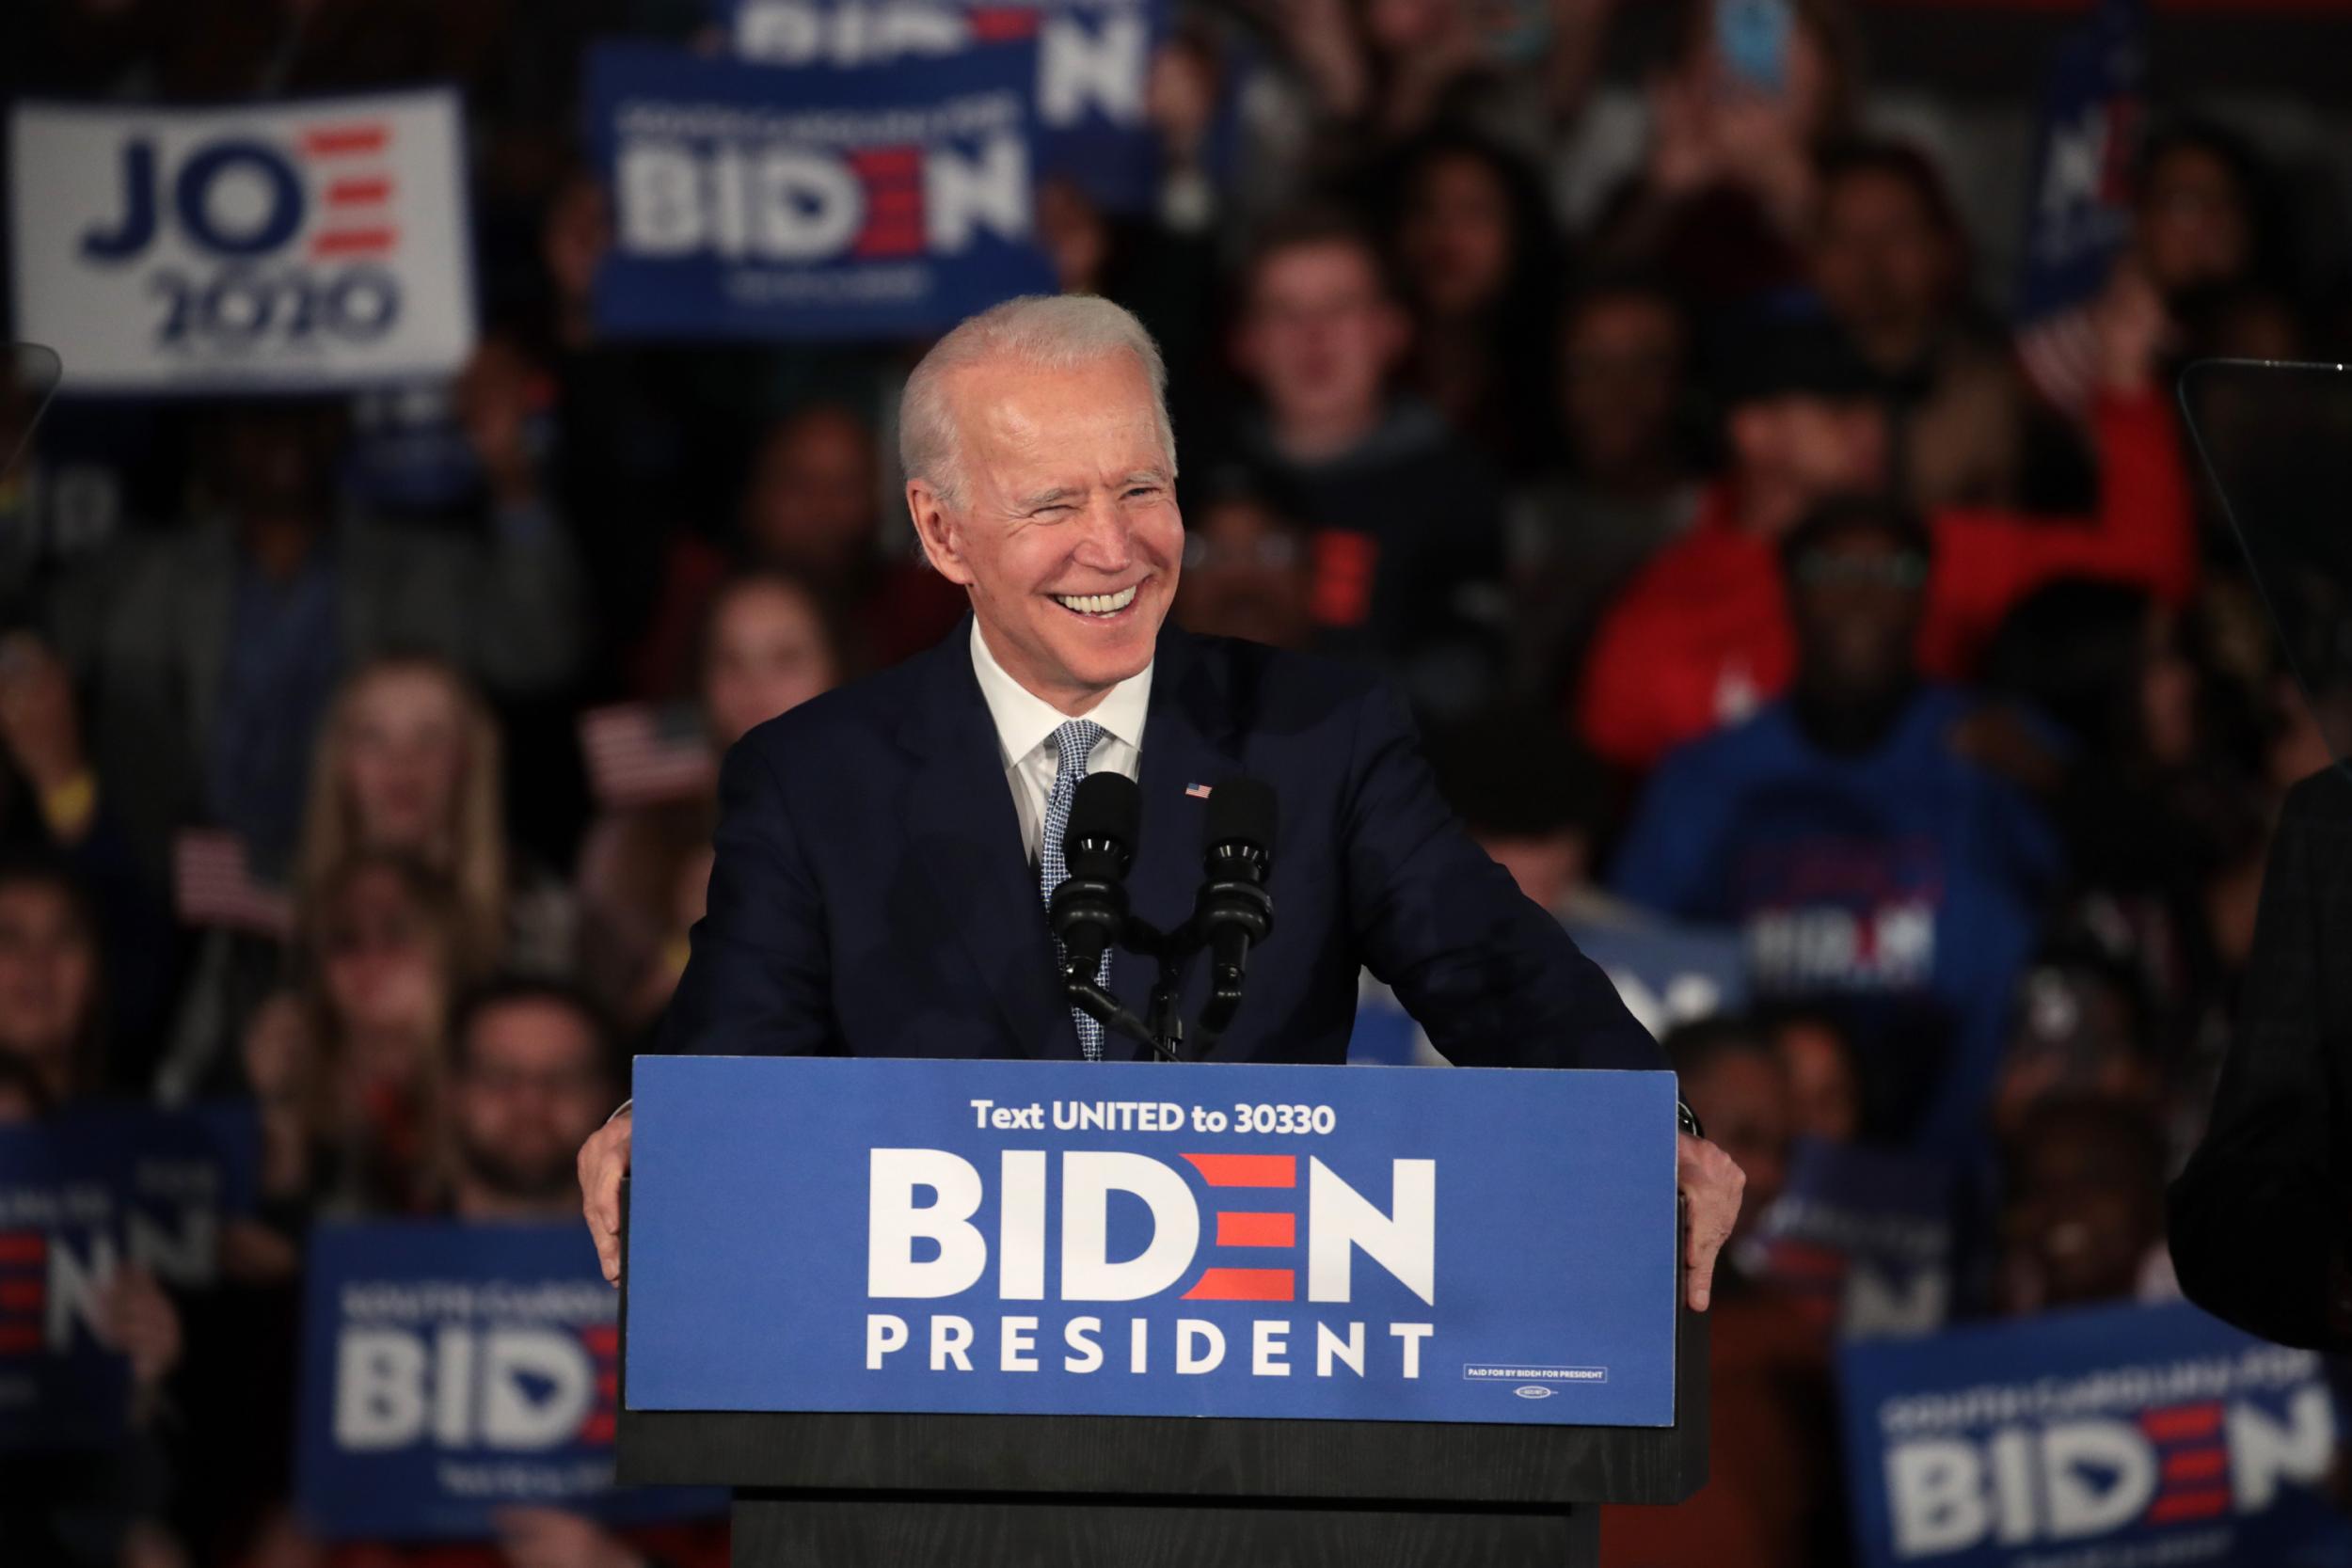 Joe Biden told supporters after his South Carolina primary win that the campaign is 'very much alive'.